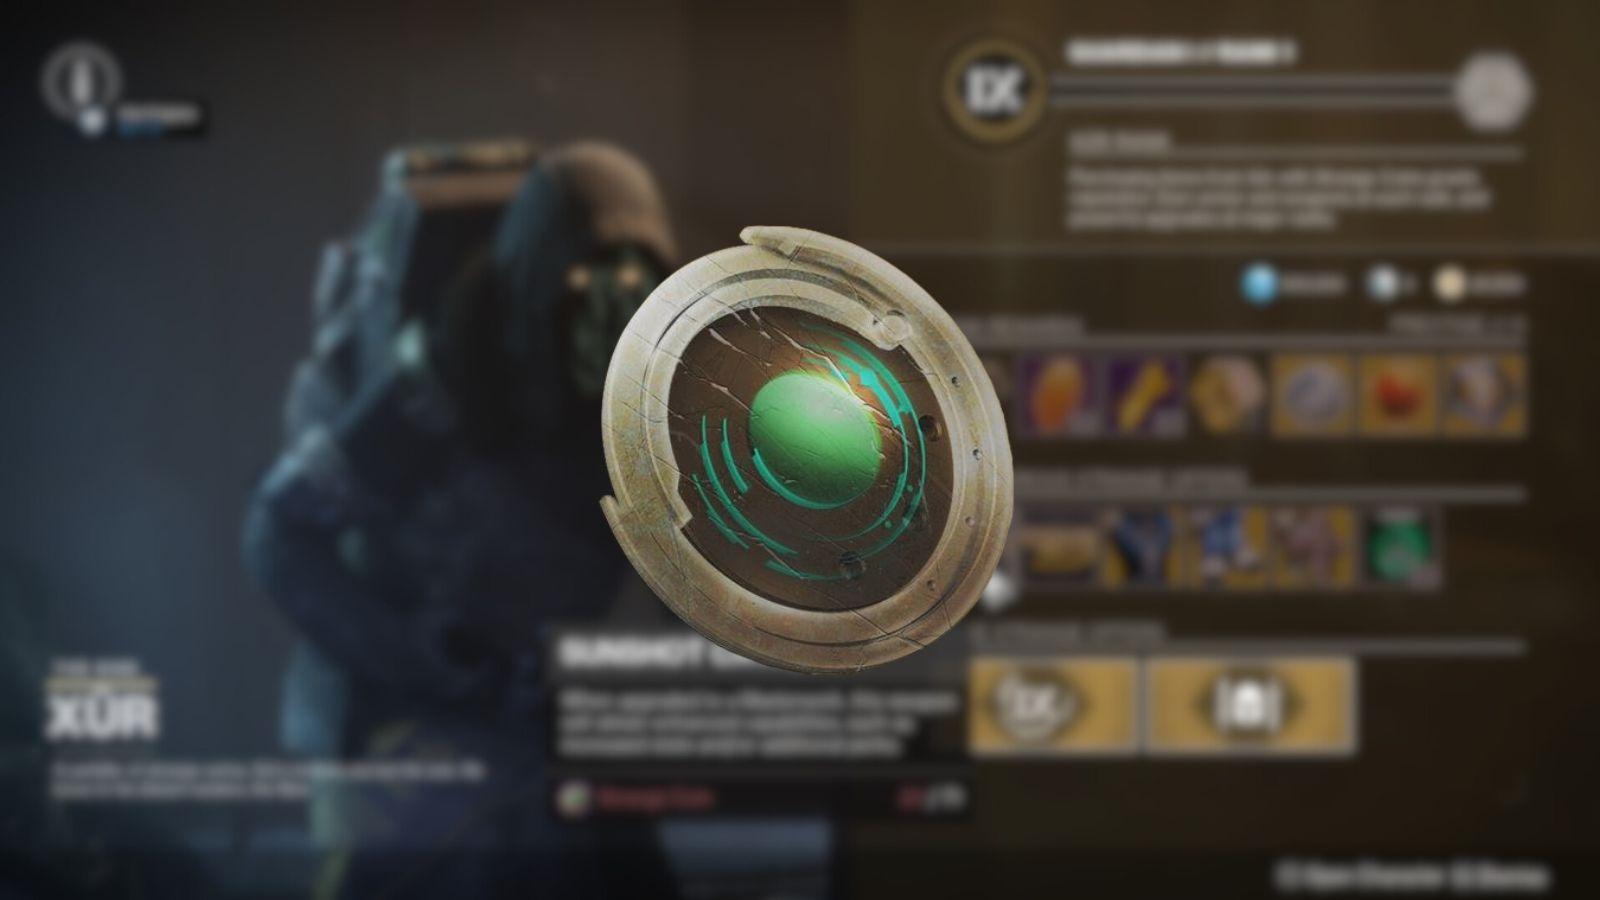 A Strange Coin on the Xur storefront background